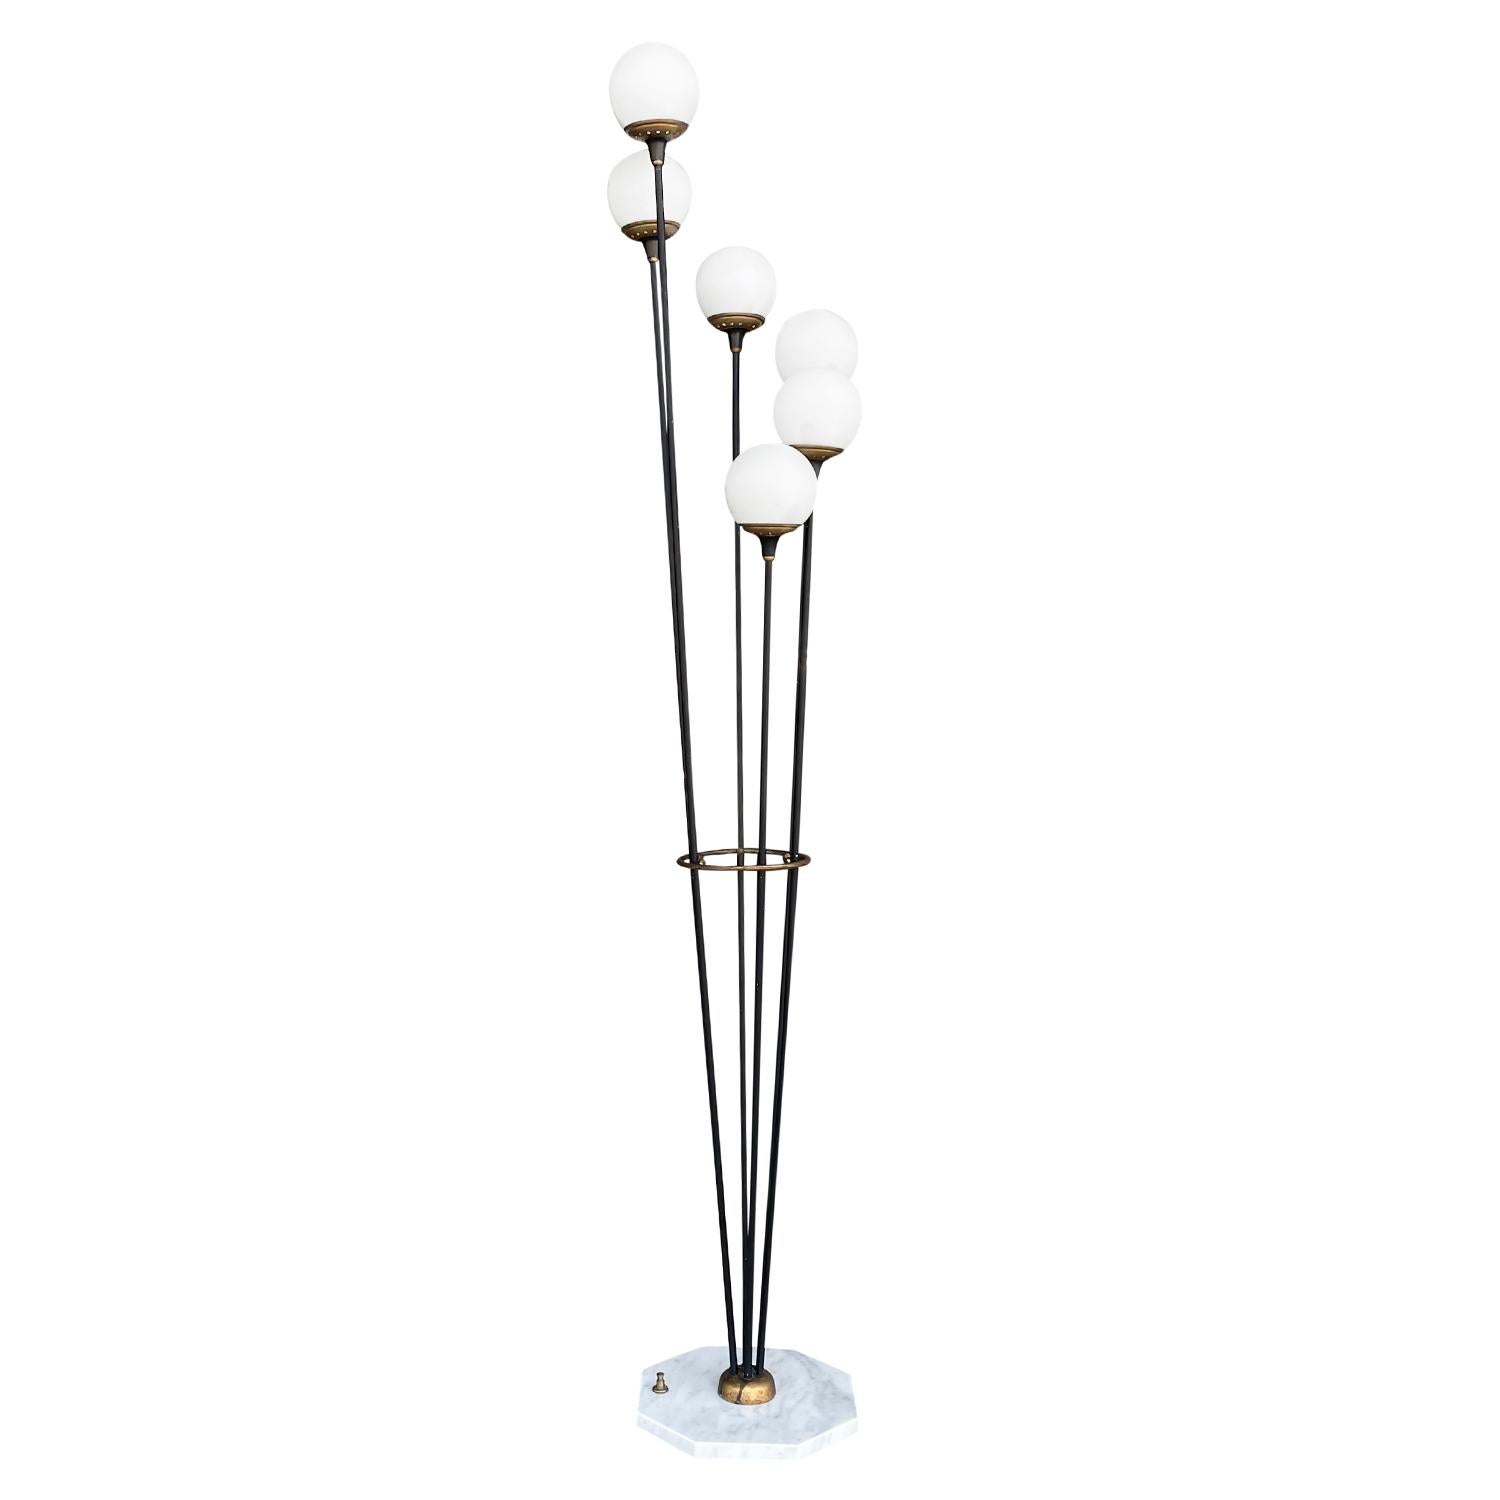 A vintage Mid-Century Modern Italian floor lamp made of hand crafted metal and brass, designed and produced by Stilnovo, in good condition. The floor lamp is composed with six round brass, frosted opaline glass shades, each of the glass lights is